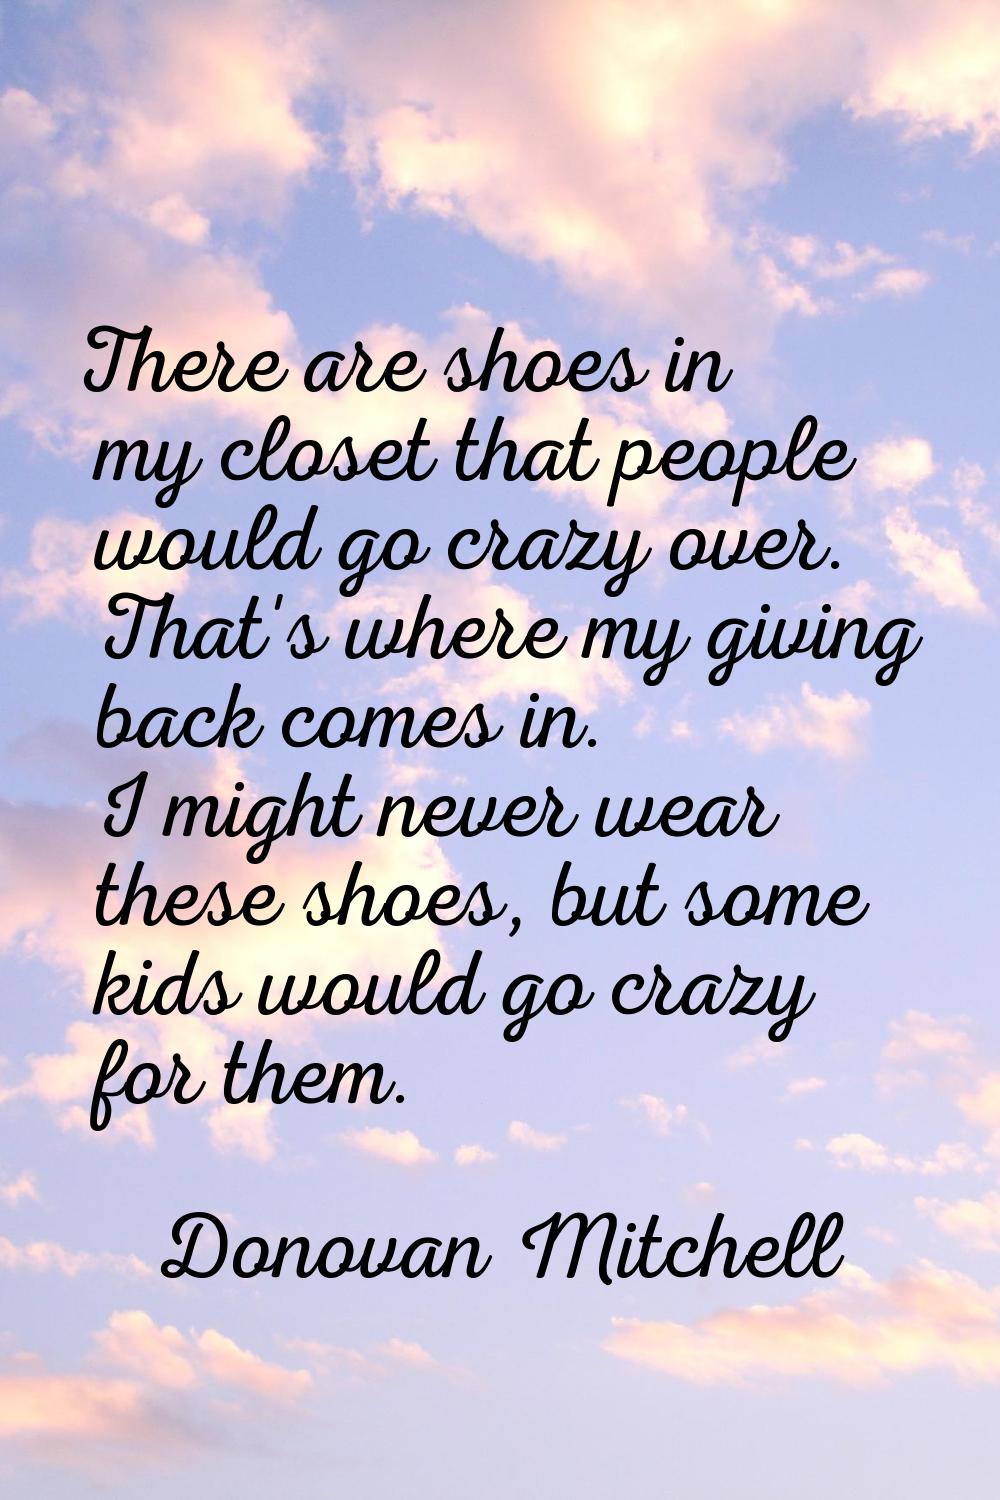 There are shoes in my closet that people would go crazy over. That's where my giving back comes in.